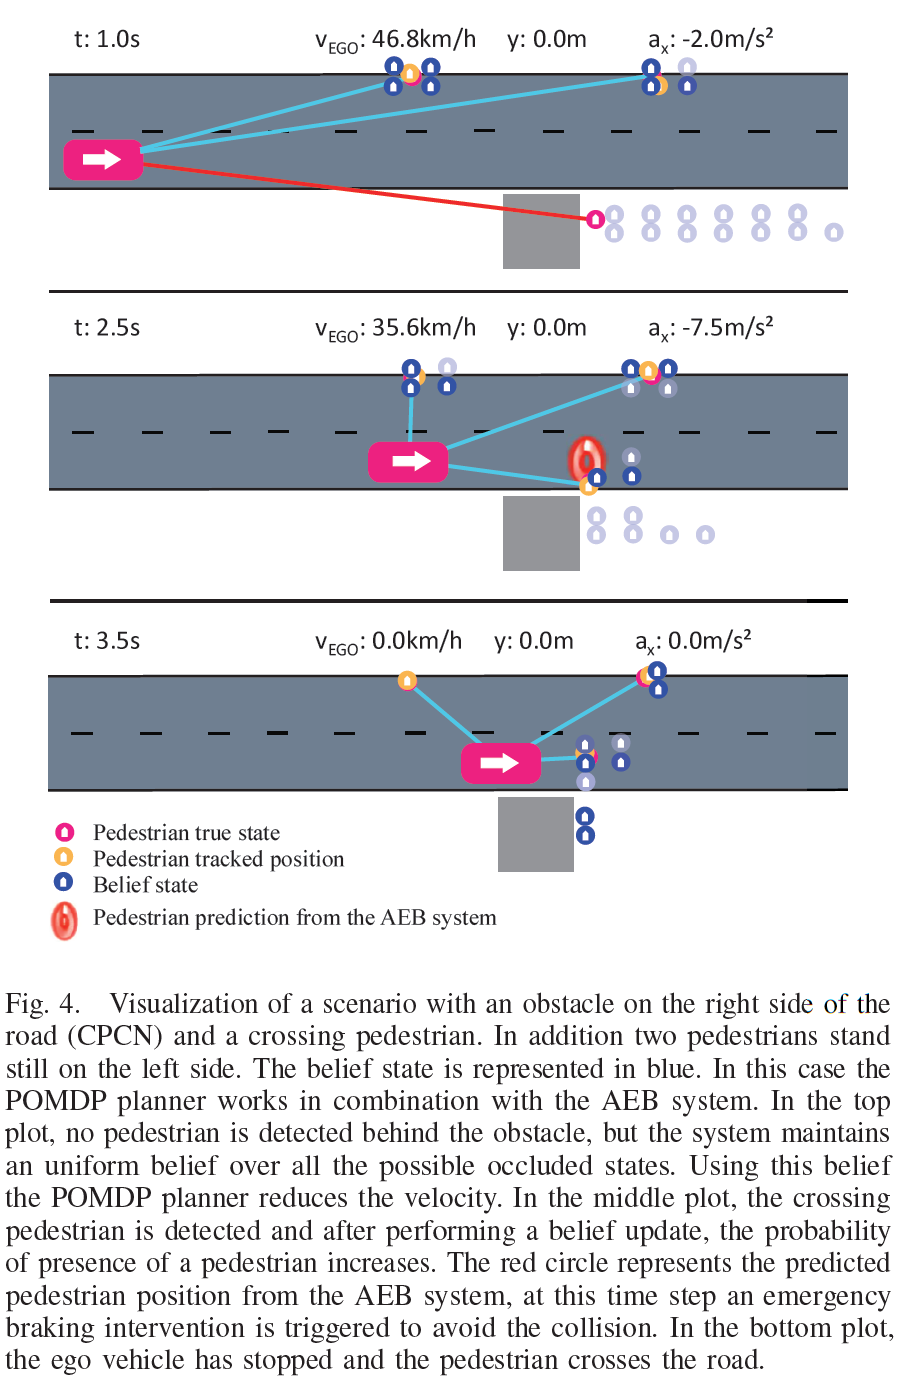 Interesting to see how the belief tracker of the POMDP maintains hypotheses about occluded pedestrian. Source: (Schratter et al. 2019).